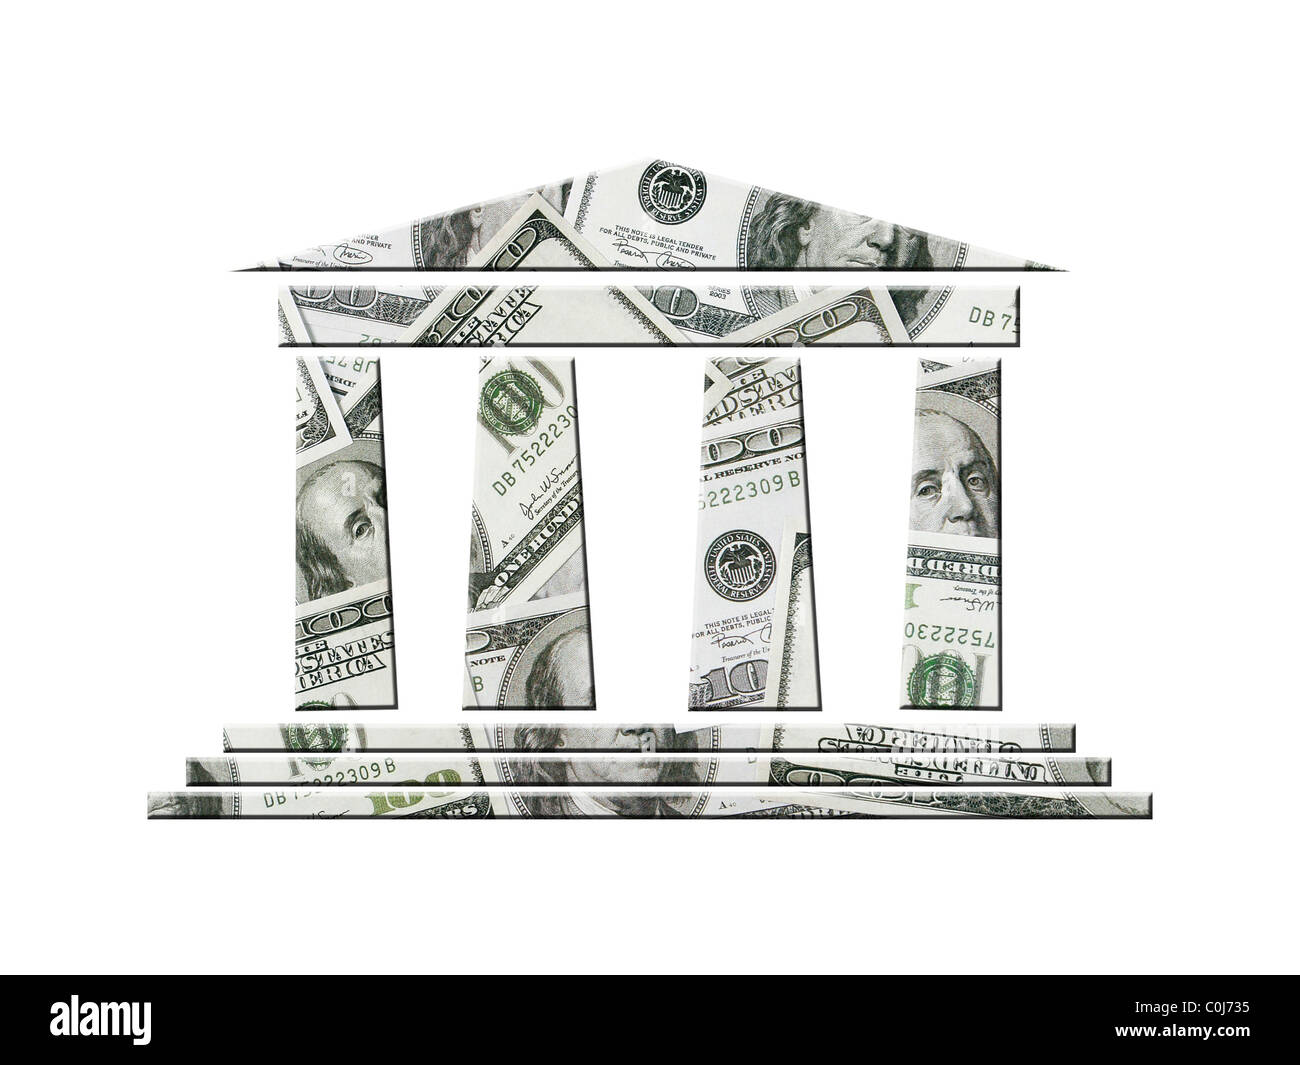 Bank icon with superimposed background of one hundred US dollars banknotes Stock Photo